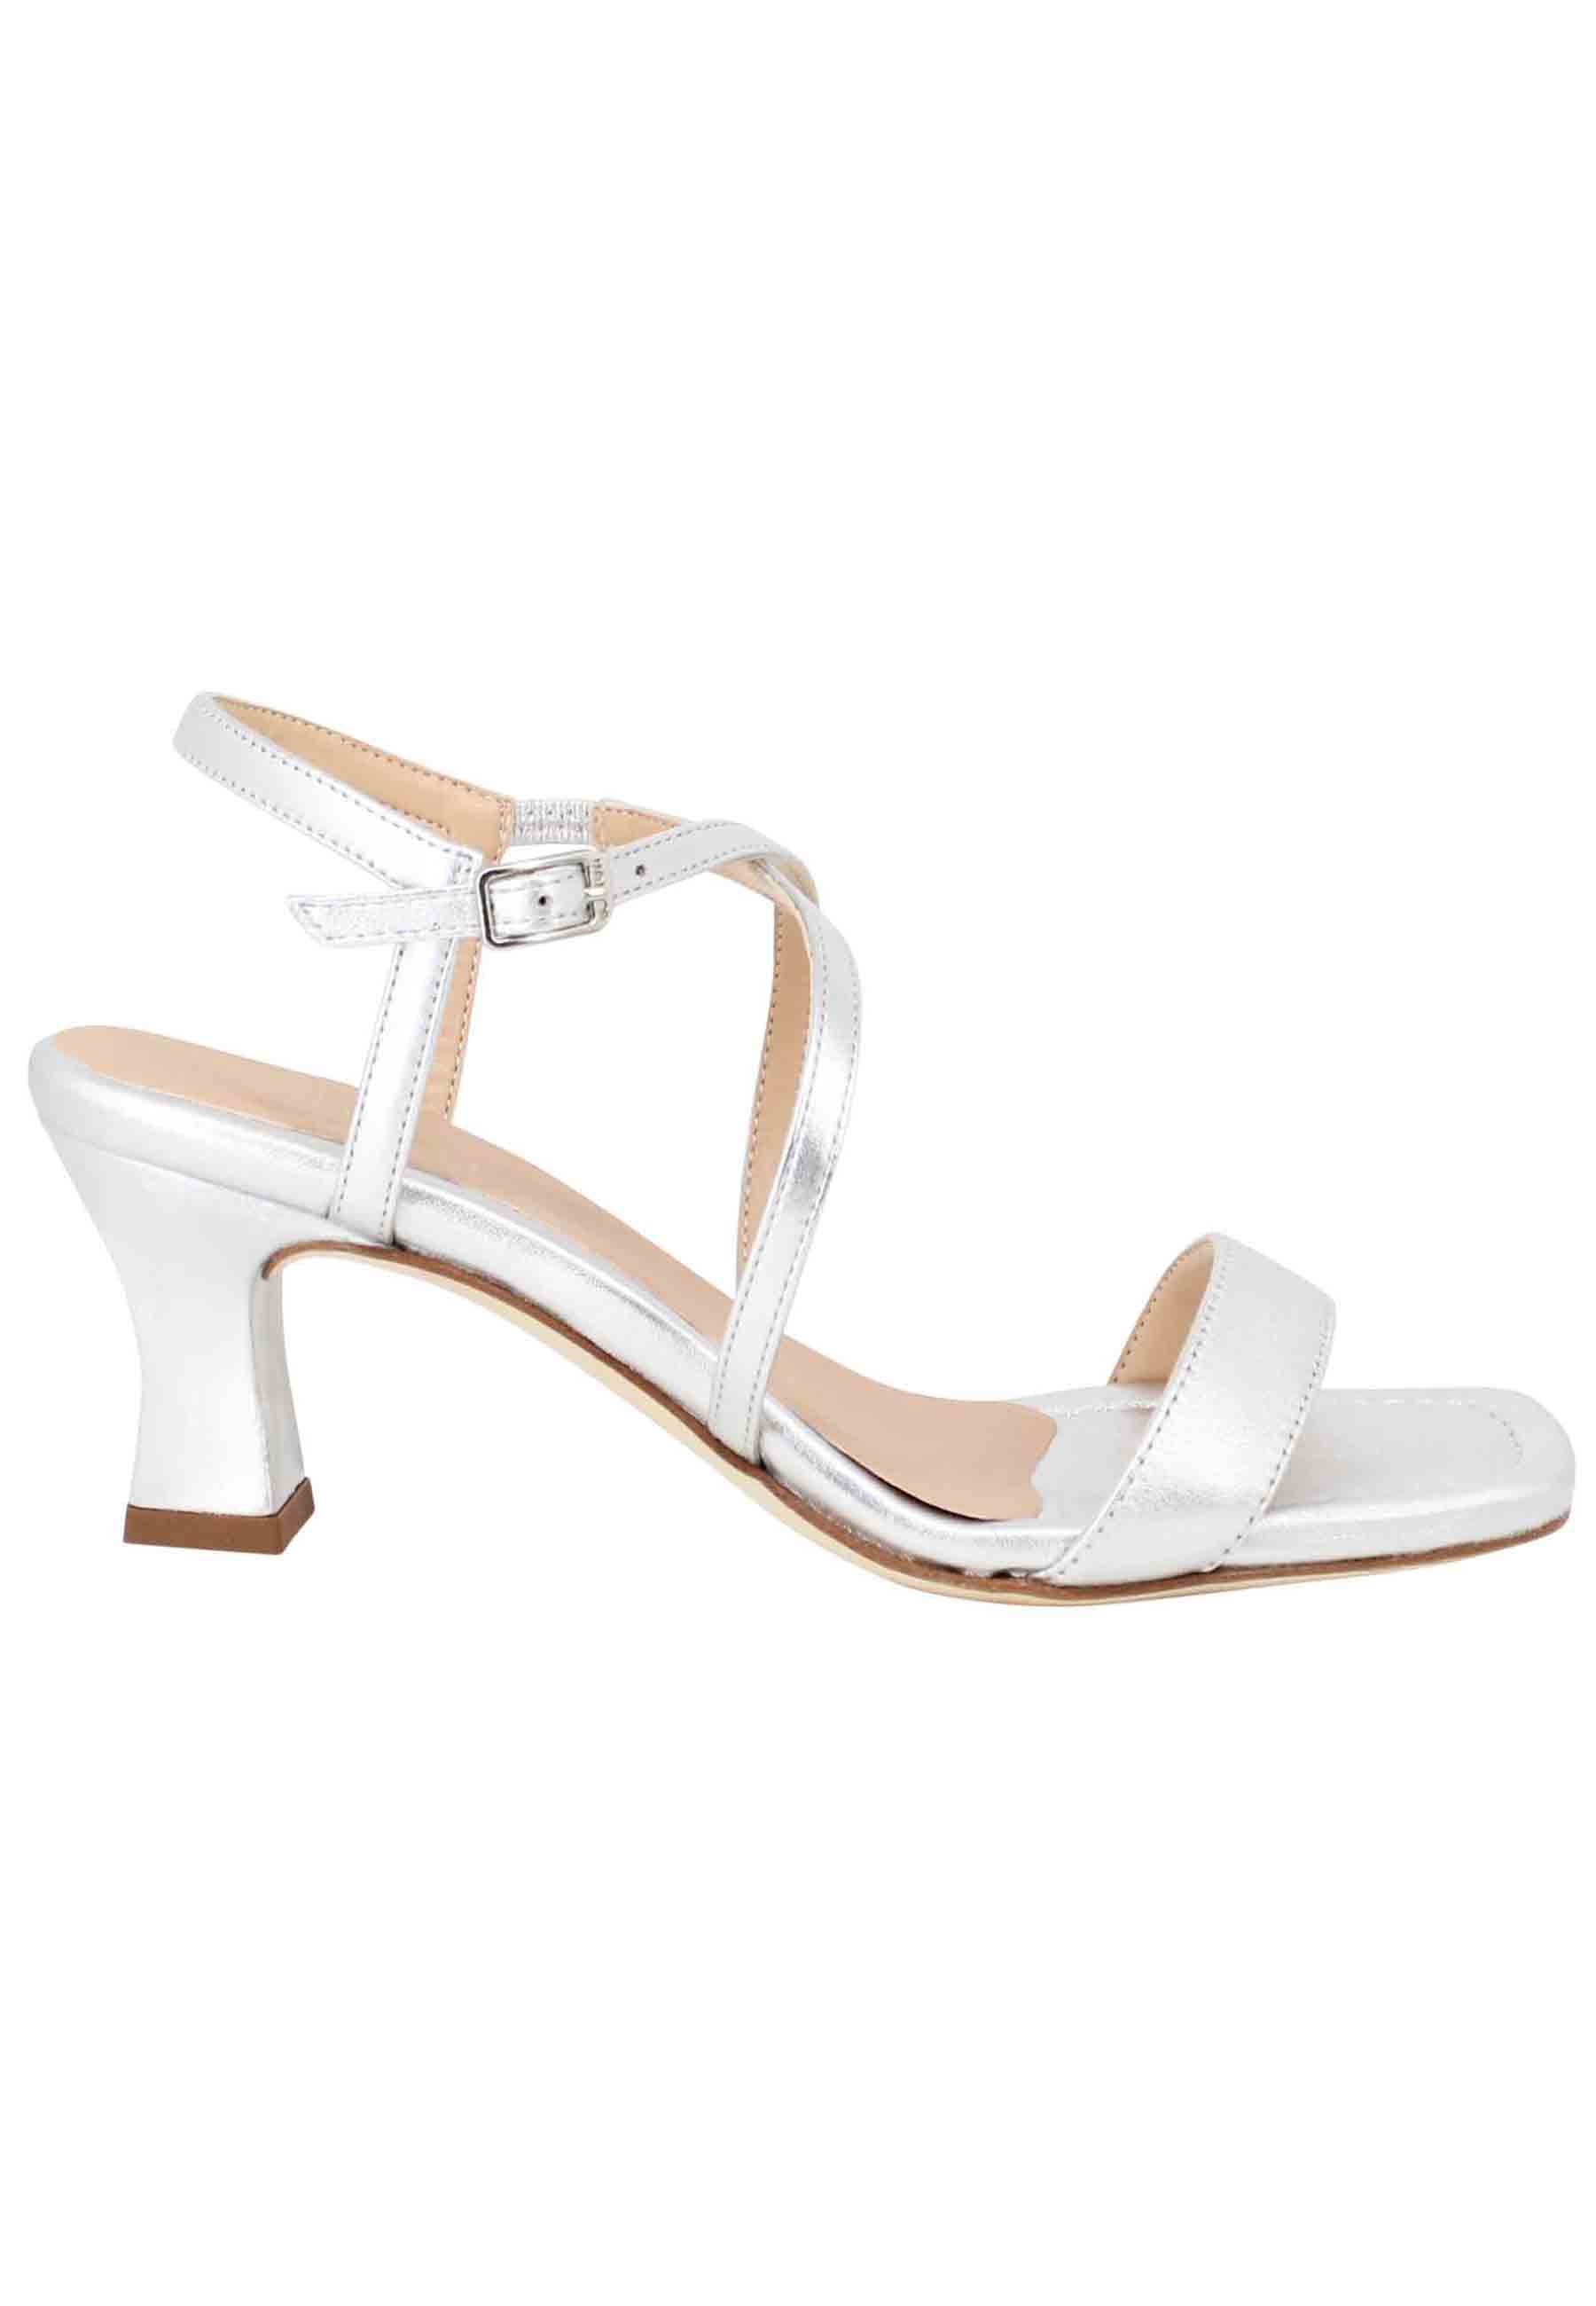 Women's slingback sandals in silver leather with leather sole and square toe